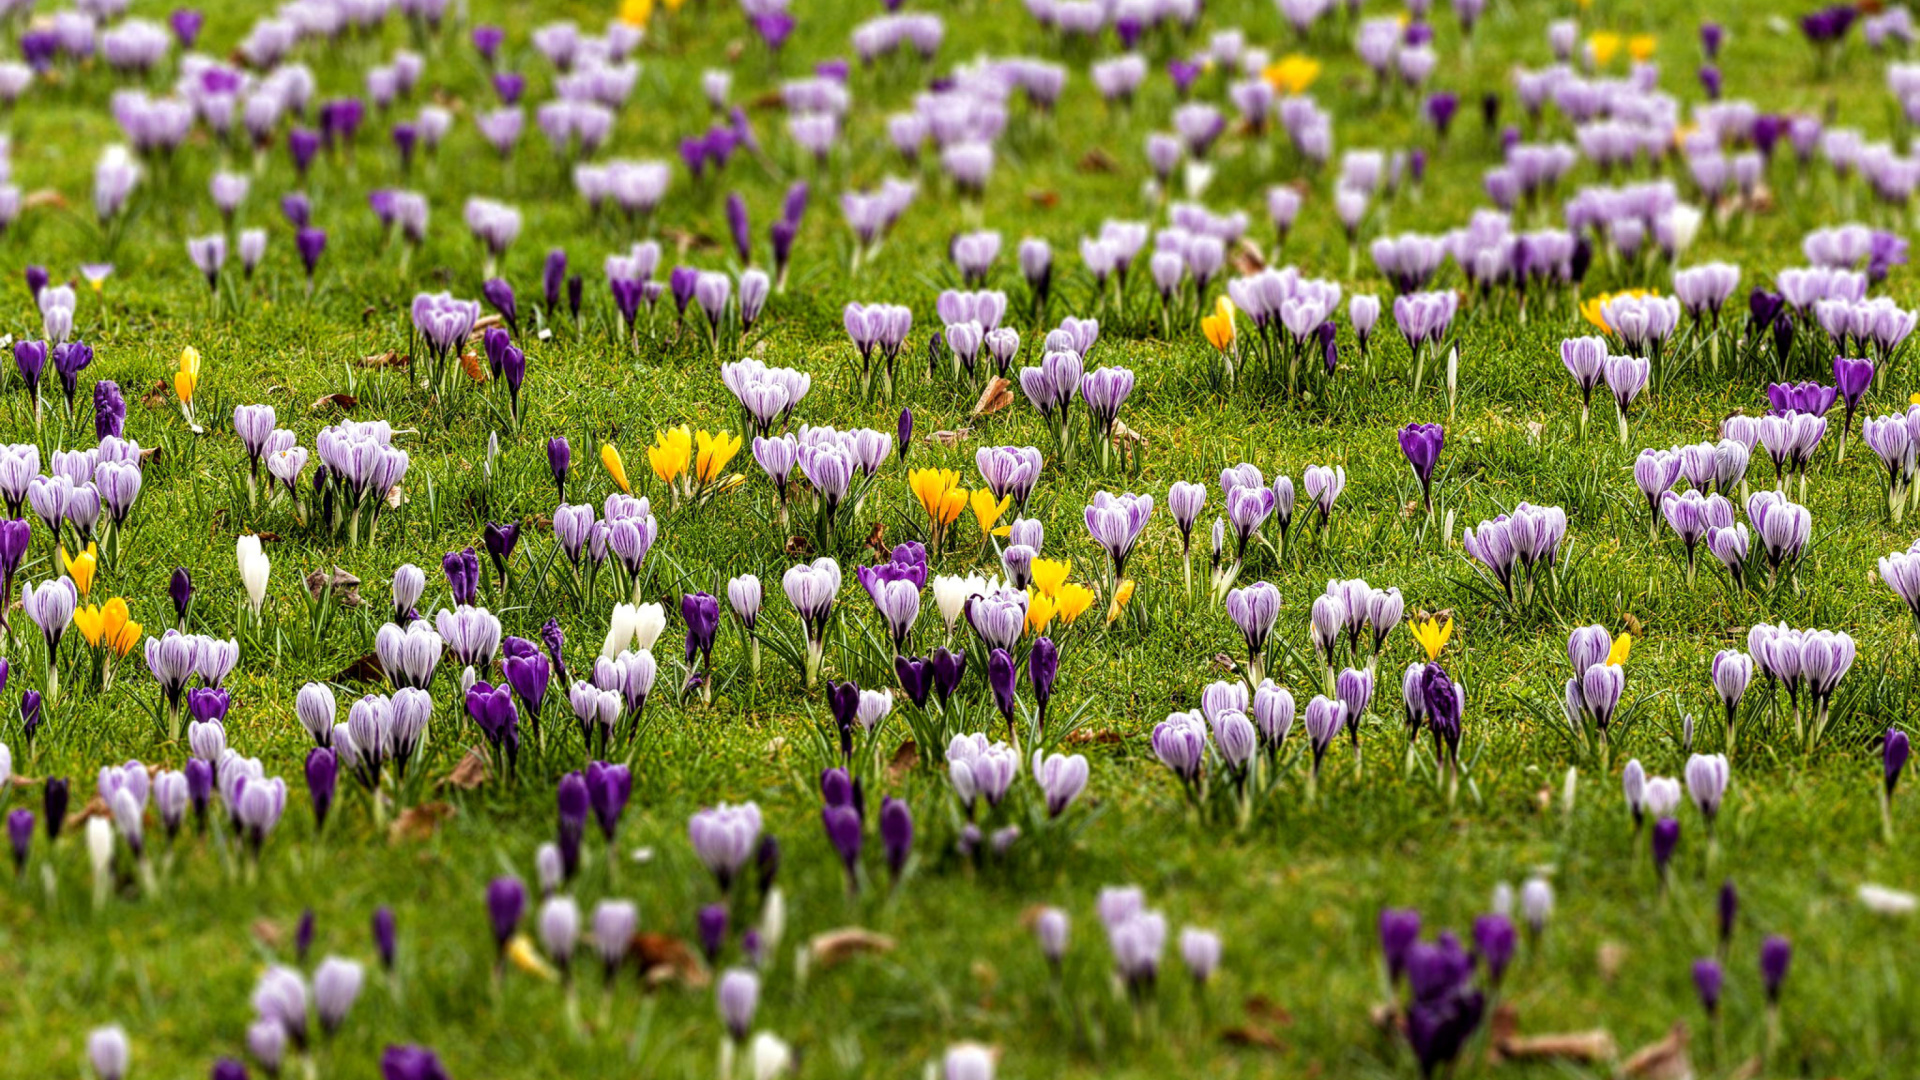 Crocuses and Spring Meadow wallpaper 1920x1080